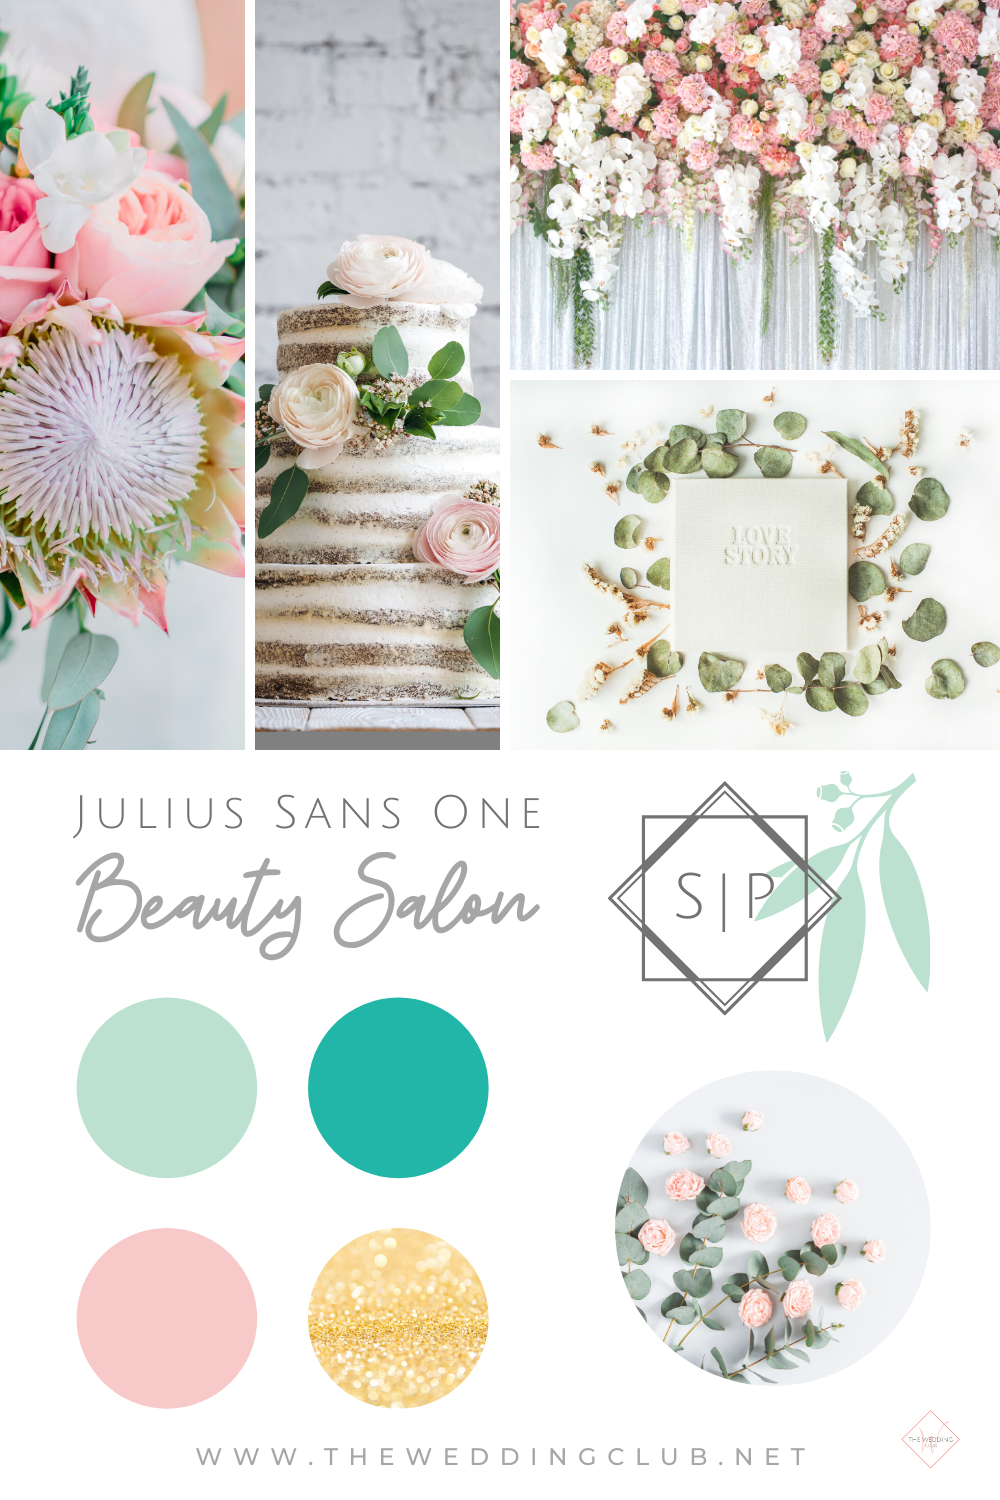 Create a mood board for your wedding style and vibe. This can easily be done with online design platforms, such as Canva.